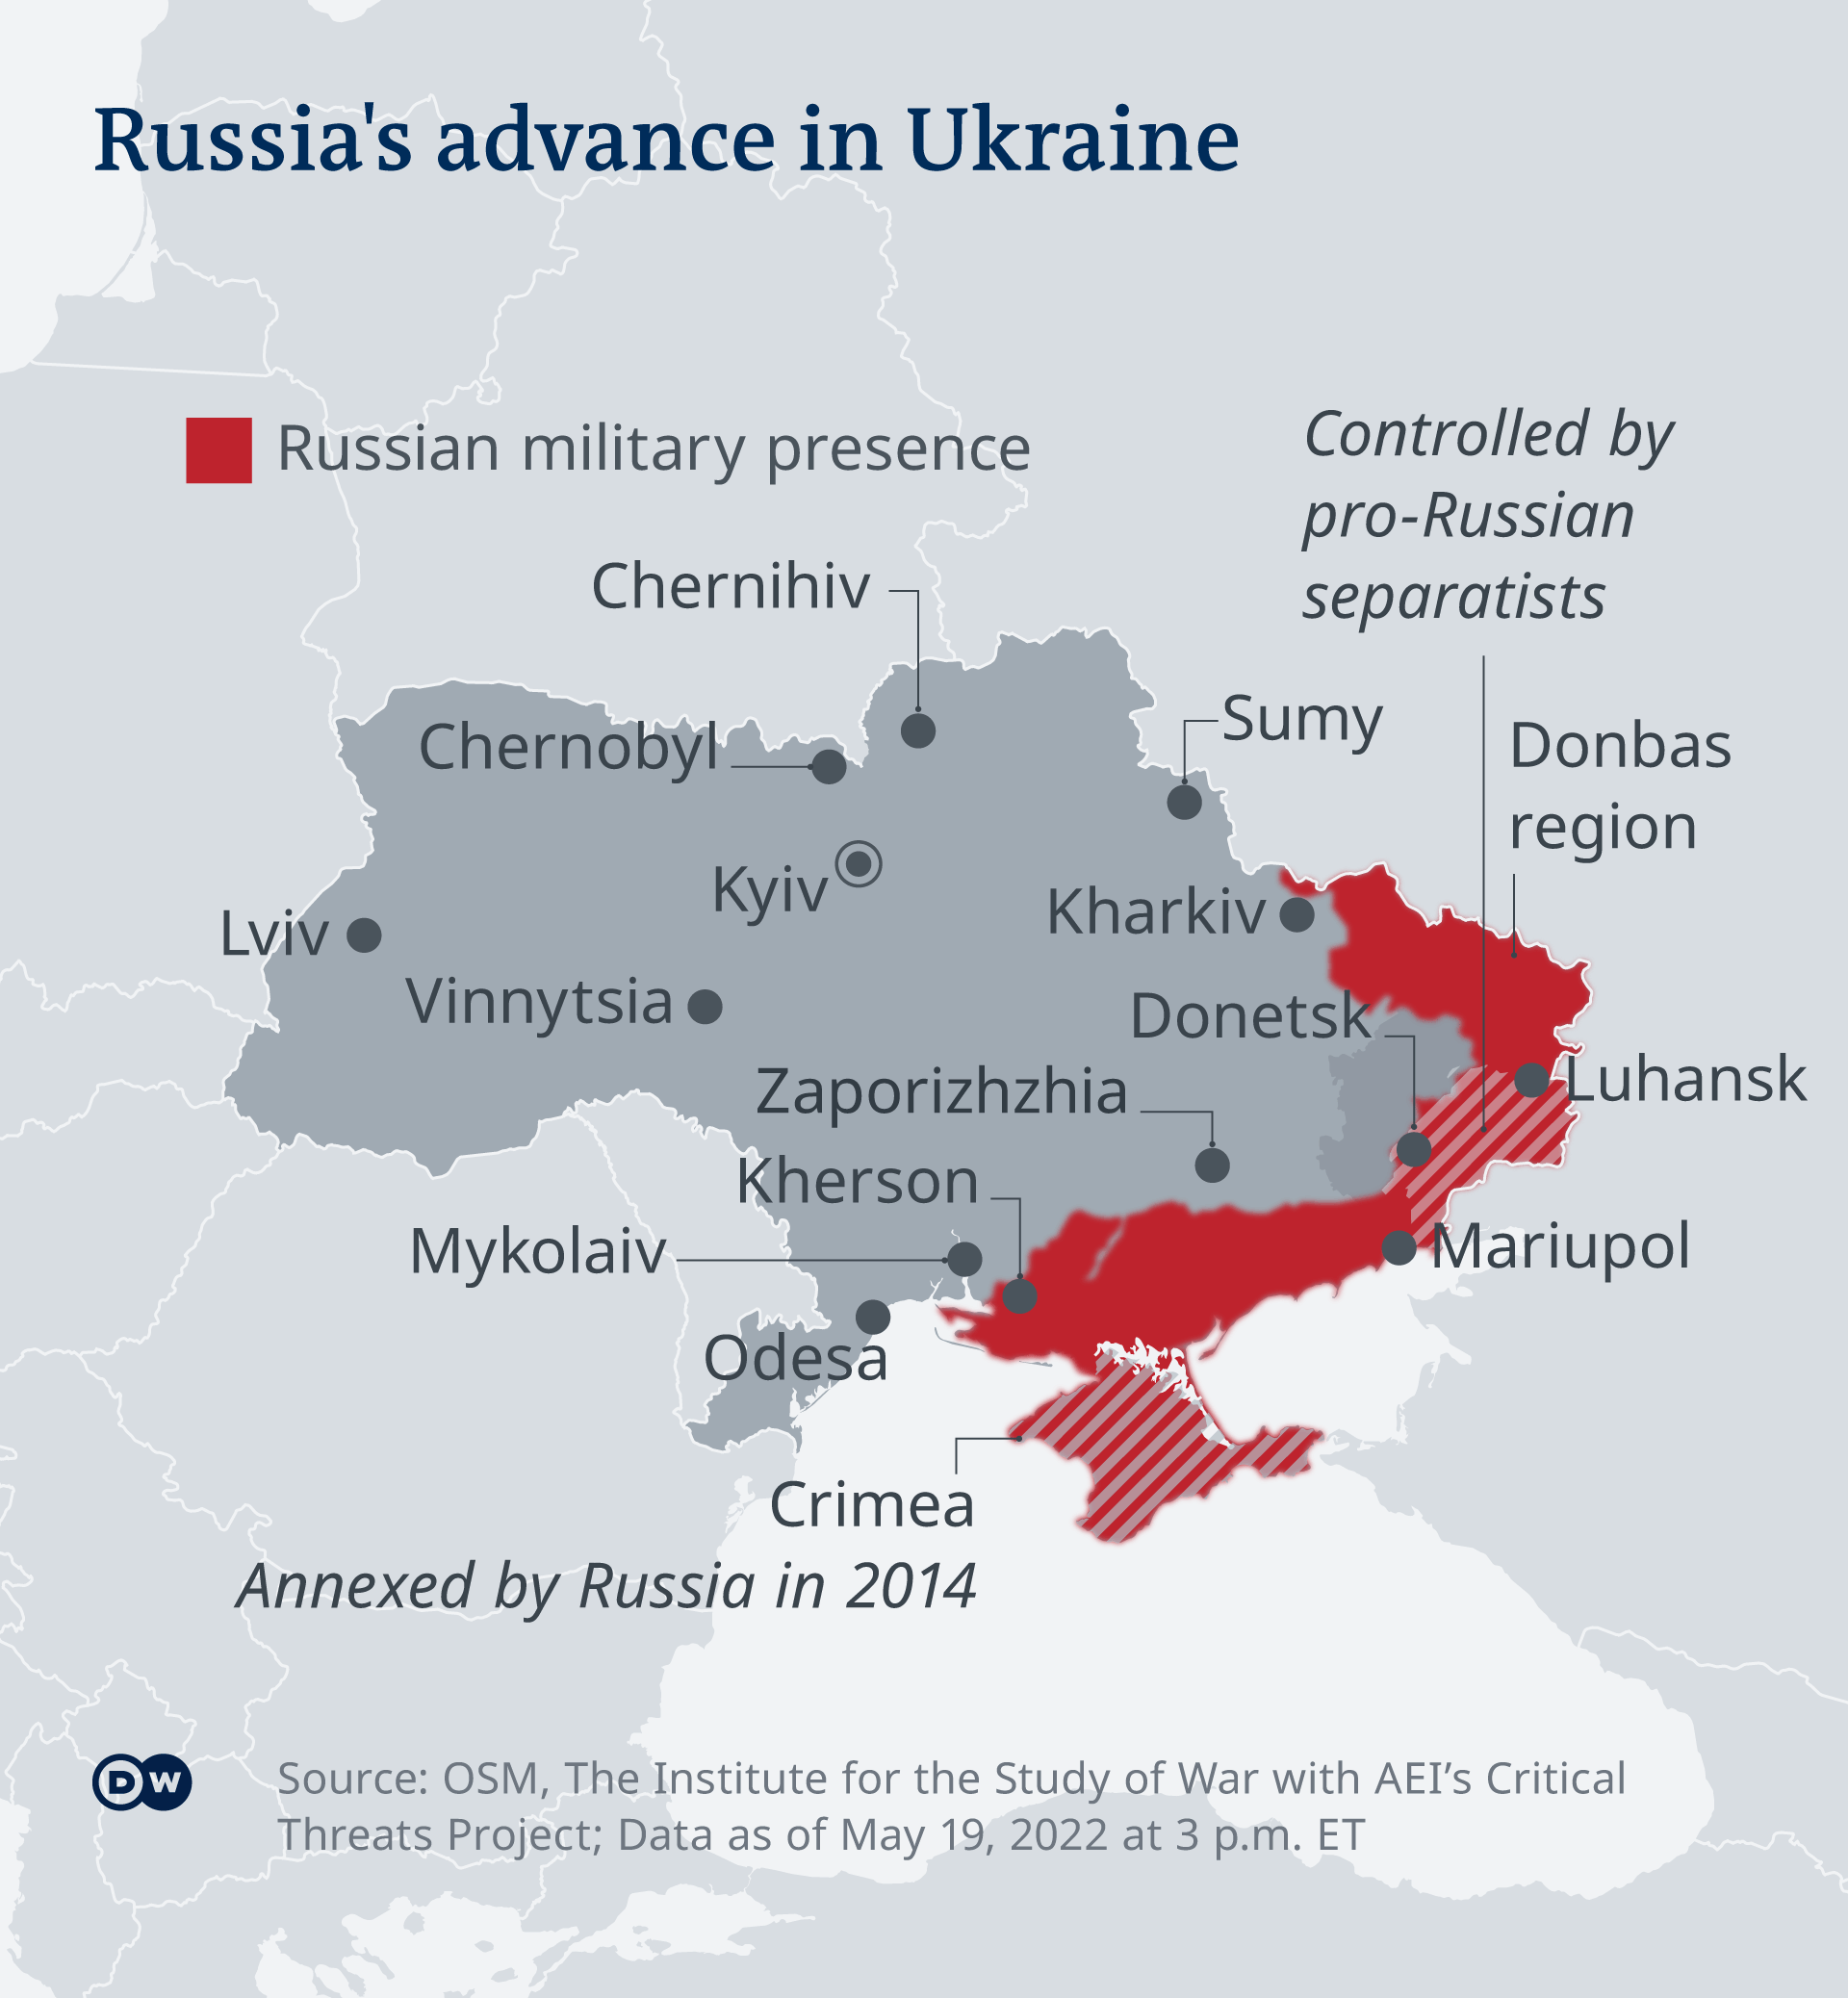 A map showing which parts of Ukraine are controlled by Russian forces